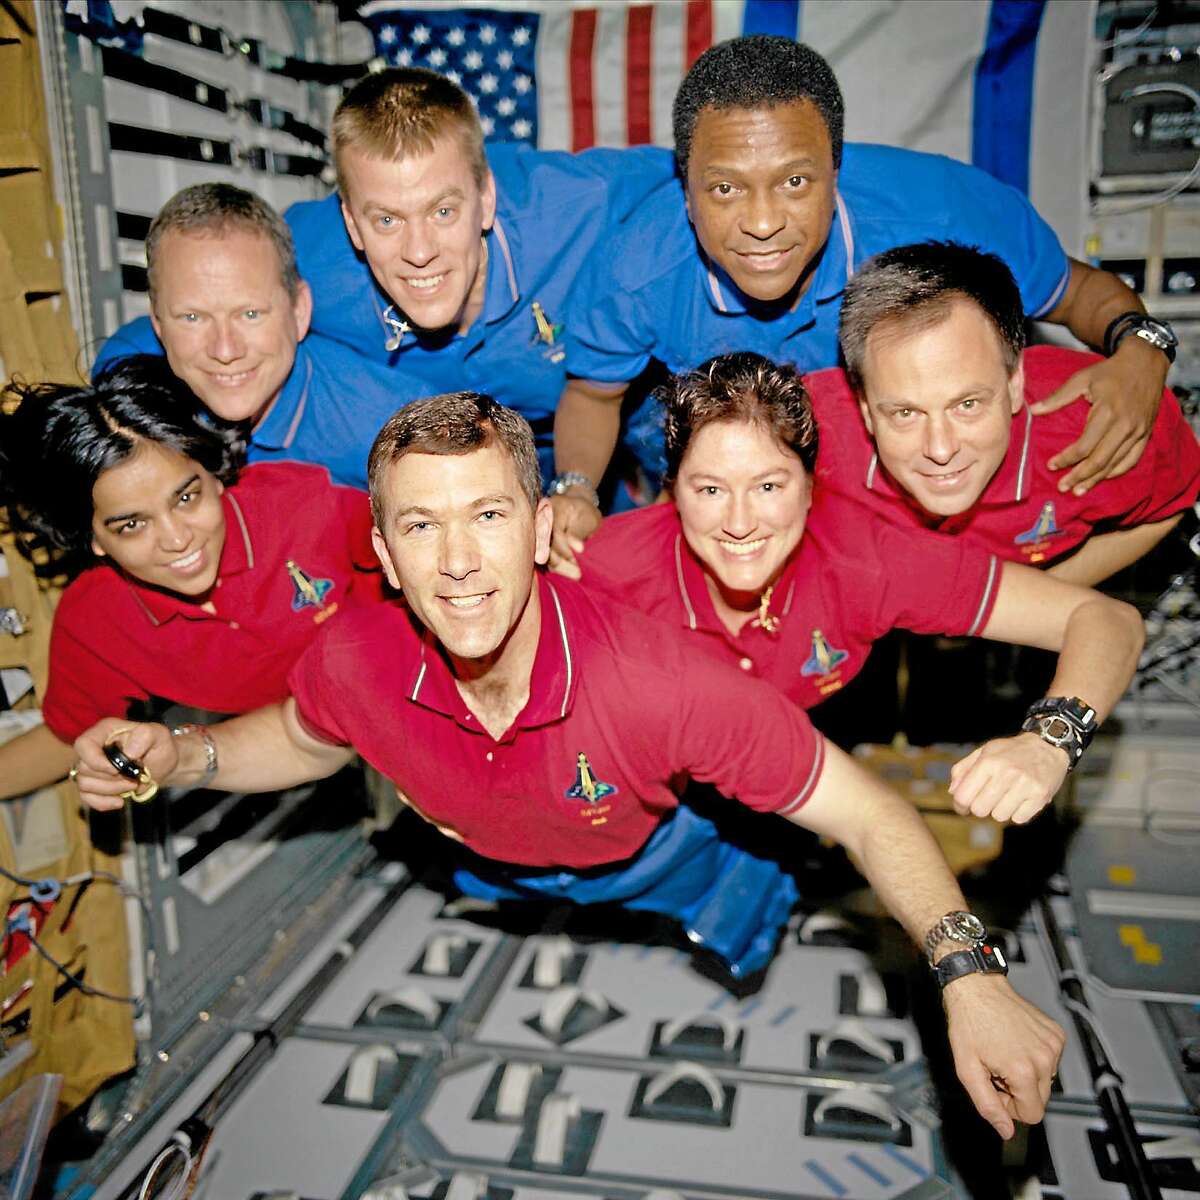 Associated Press ¬ This photo provided by NASA in June 2003 shows the Columbia crew. This picture was on a roll of unprocessed film later recovered by searchers from the debris. From the left are astronauts Kalpana Chawla, mission specialist; Rick D. Husband, mission commander; Laurel B. Clark, mission specialist; and Ilan Ramon, payload specialist. From the left (top row) are astronauts David M. Brown, mission specialist; William C. McCool, pilot; and Michael P. Anderson, payload commander.